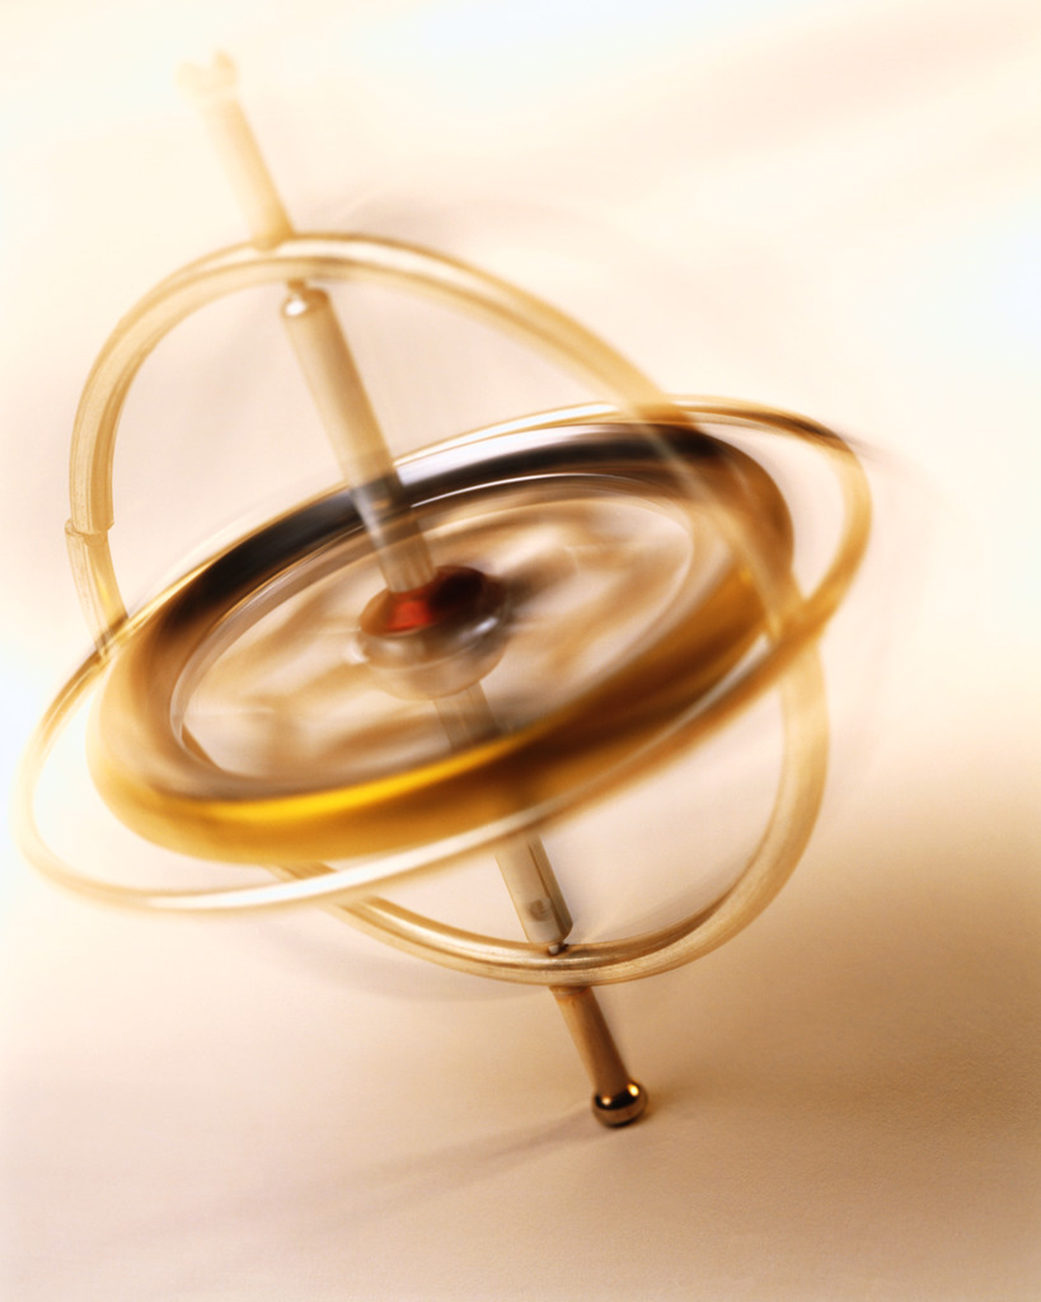 Close-up of a gyroscope toy